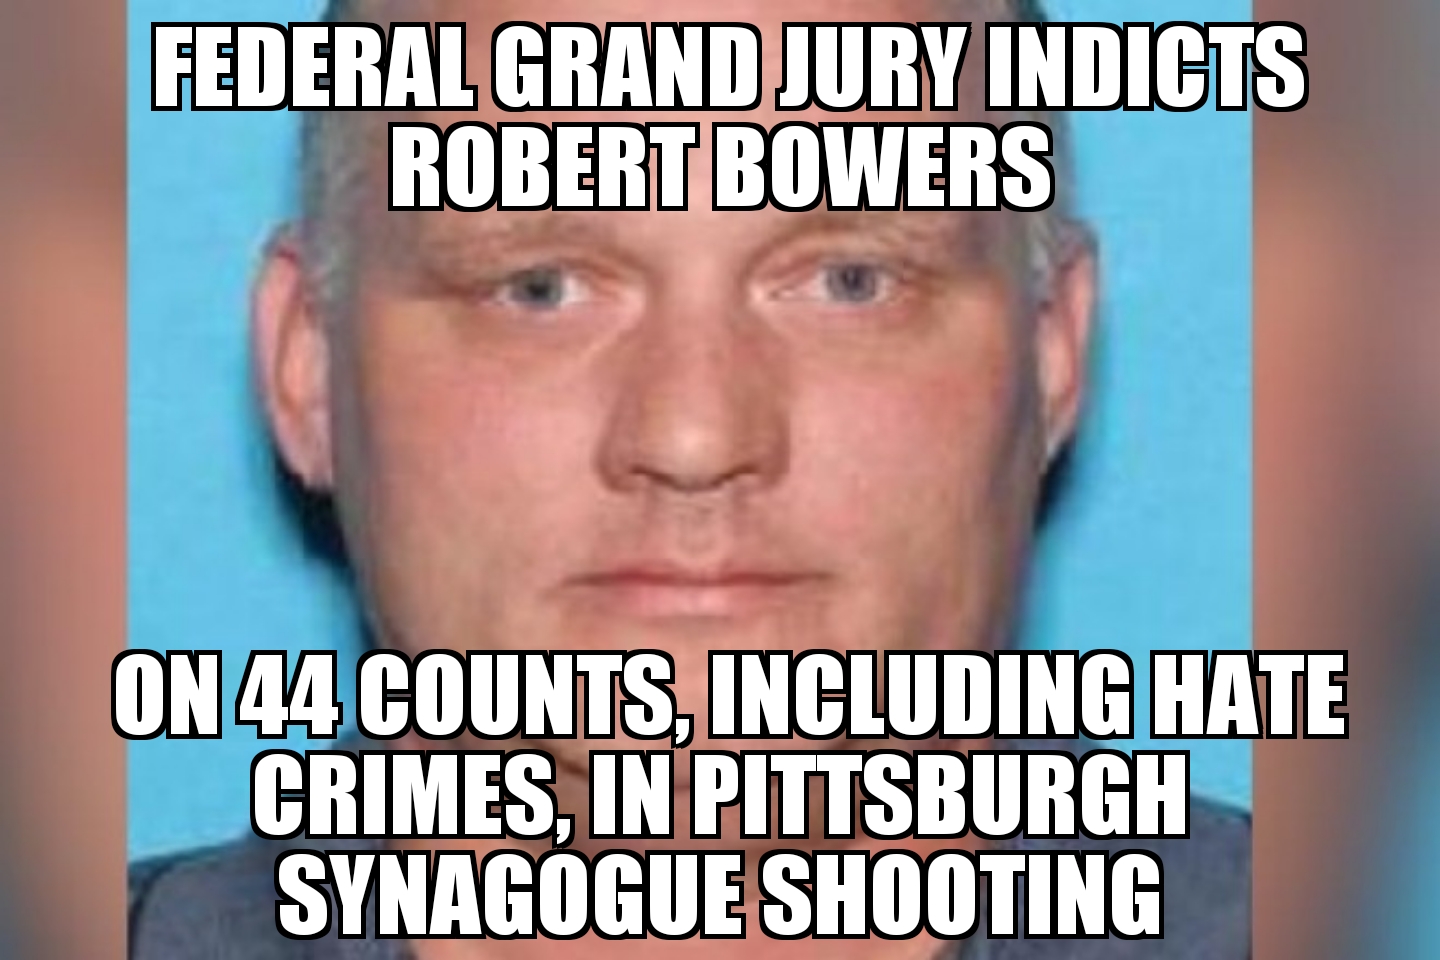 Robert Bowers indicted in Pittsburgh synagogue shooting